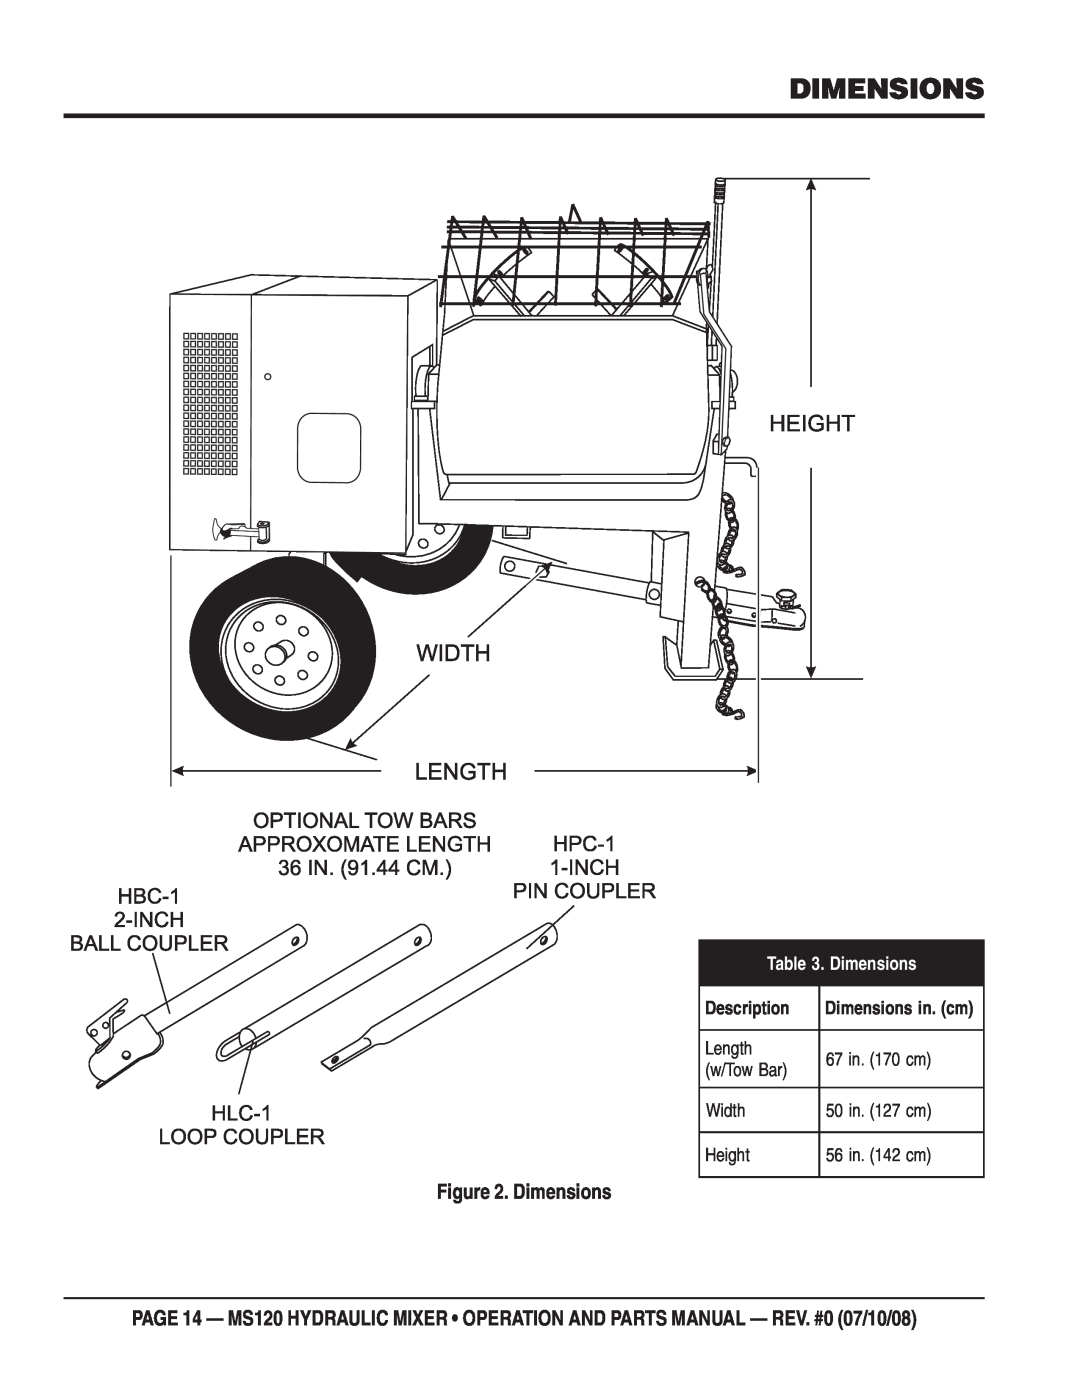 Stow MS120H13 manual Dimensions, Description, Length, 67 in. 170 cm, w/Tow Bar, Width, 50 in. 127 cm, Height, 56 in. 142 cm 